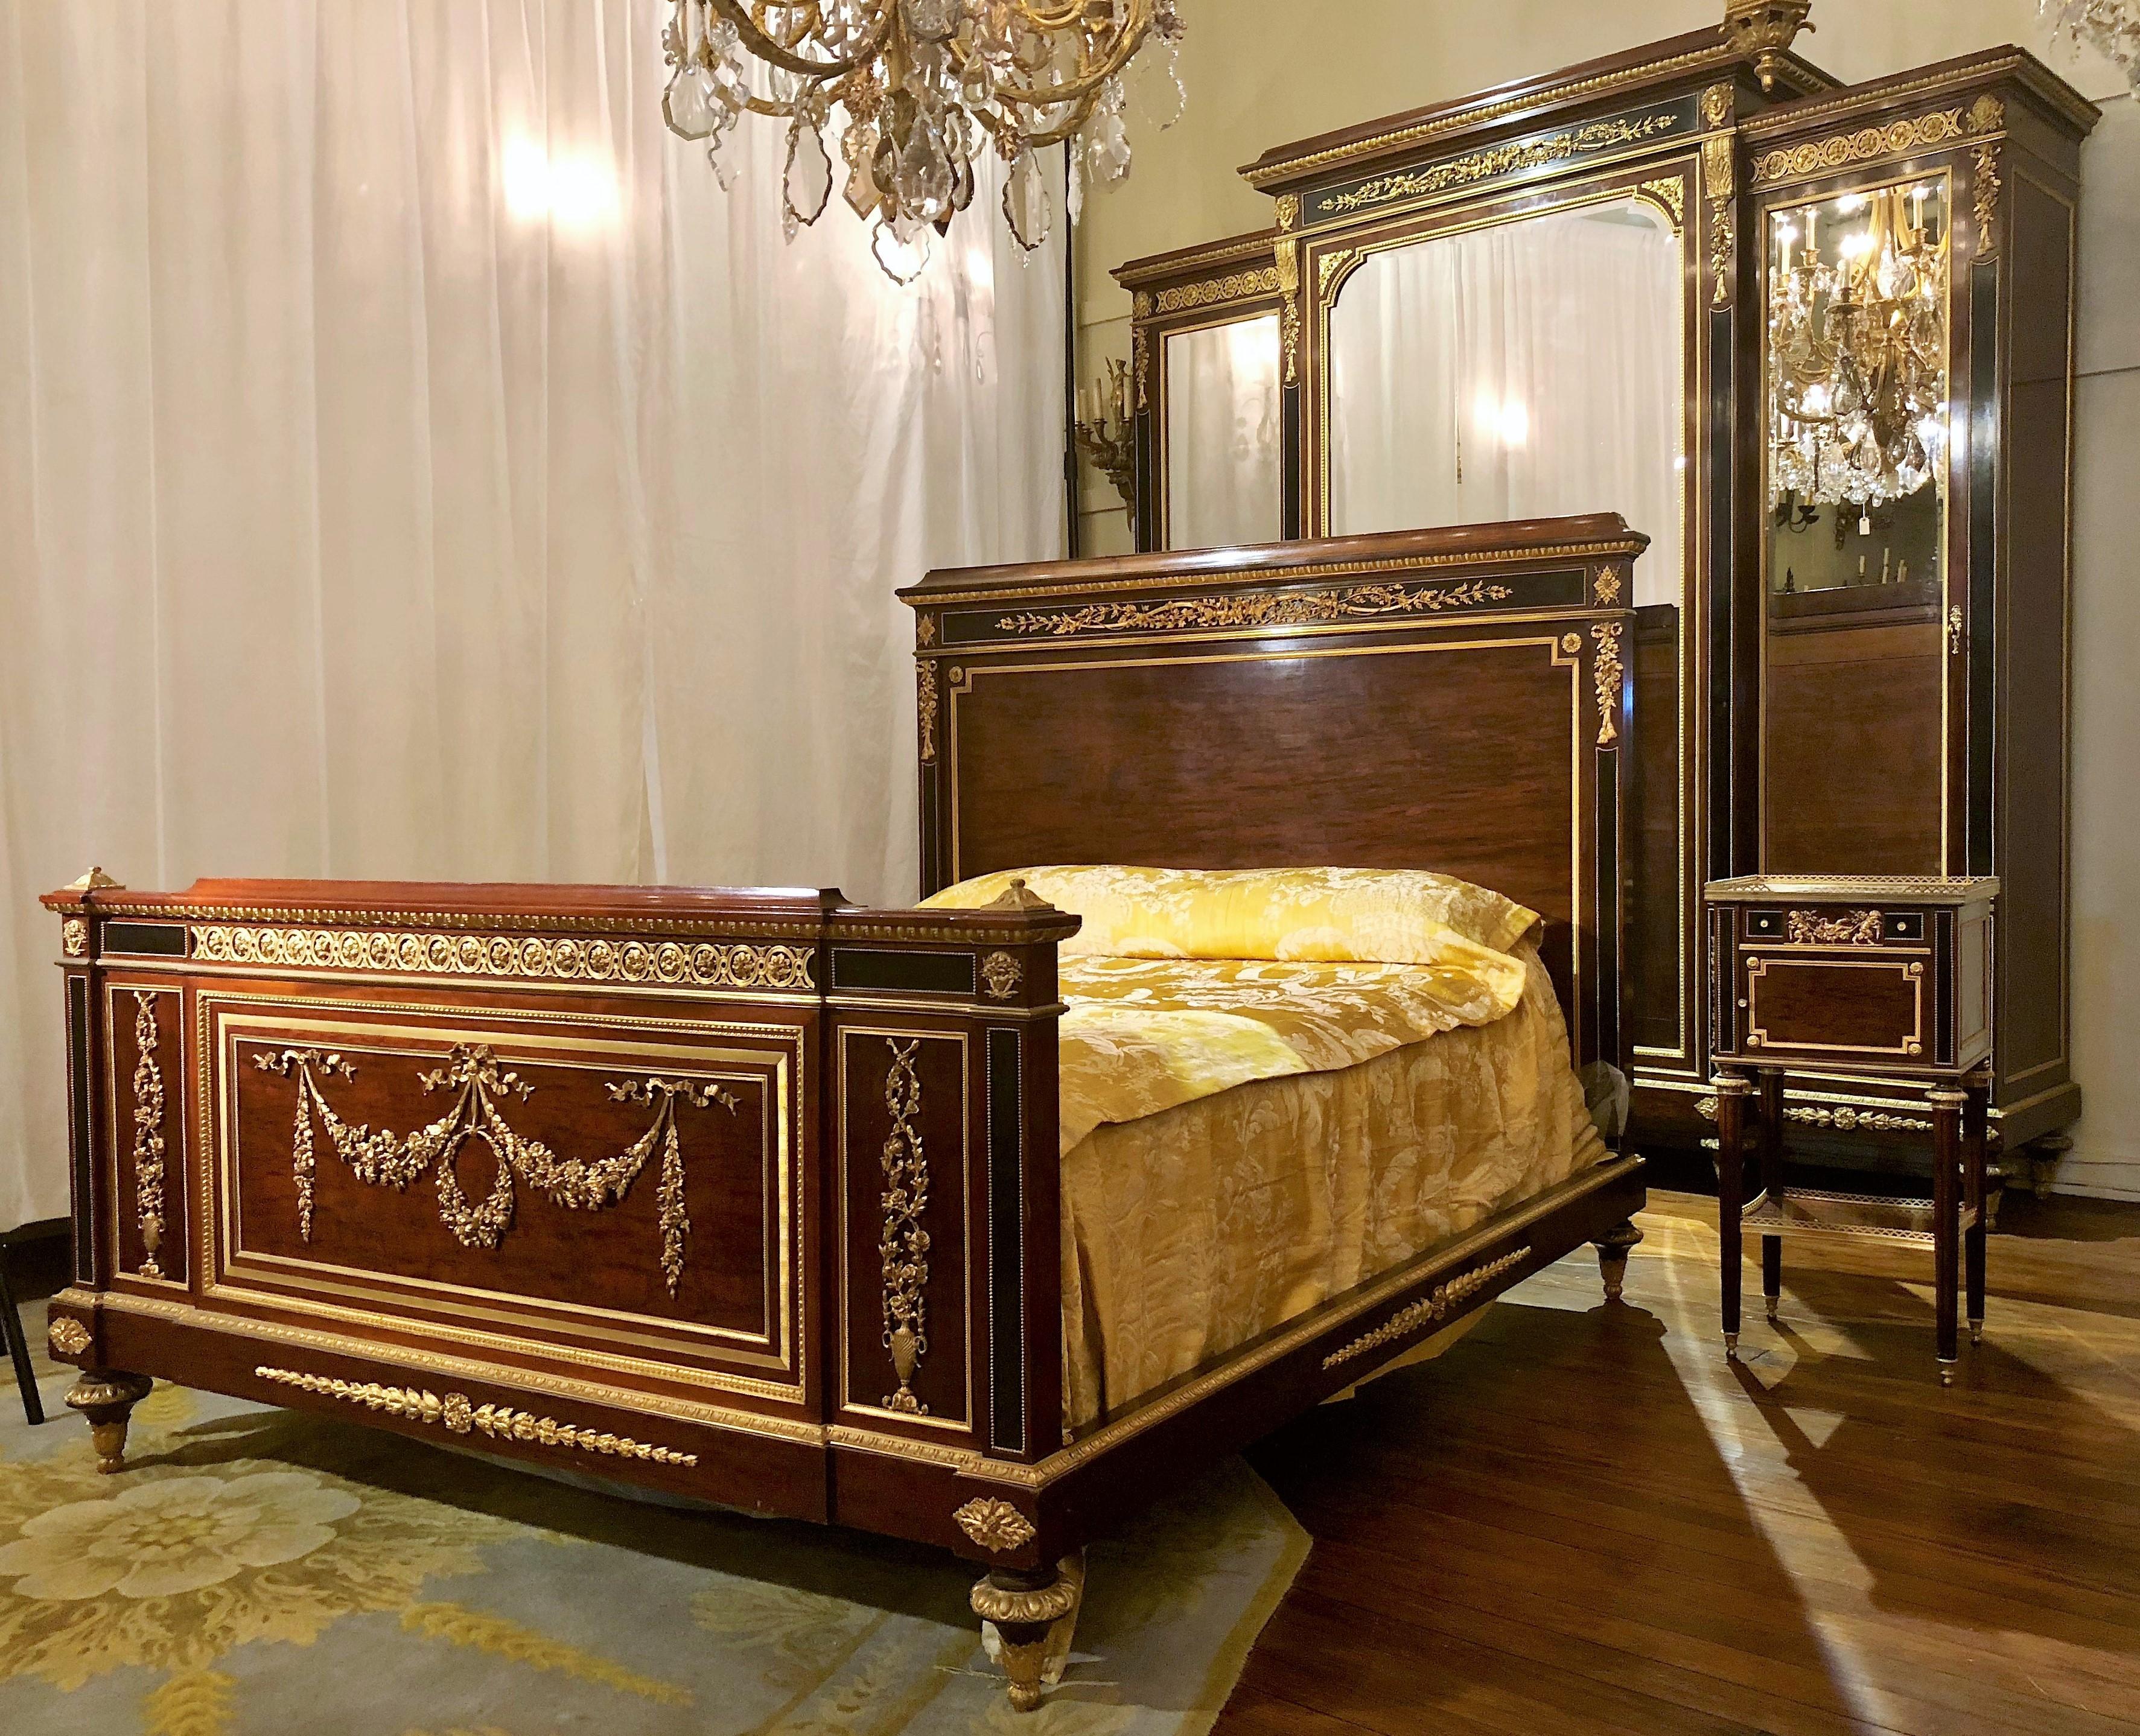 BRST012: Magnificent antique French late 19th or early 20th century Louis XVI style three-piece bedroom suite made by master cabinetmaker Francois Linke. Exceptional condition. Listed in 'The Belle Époque of French Furniture.'
Exterior